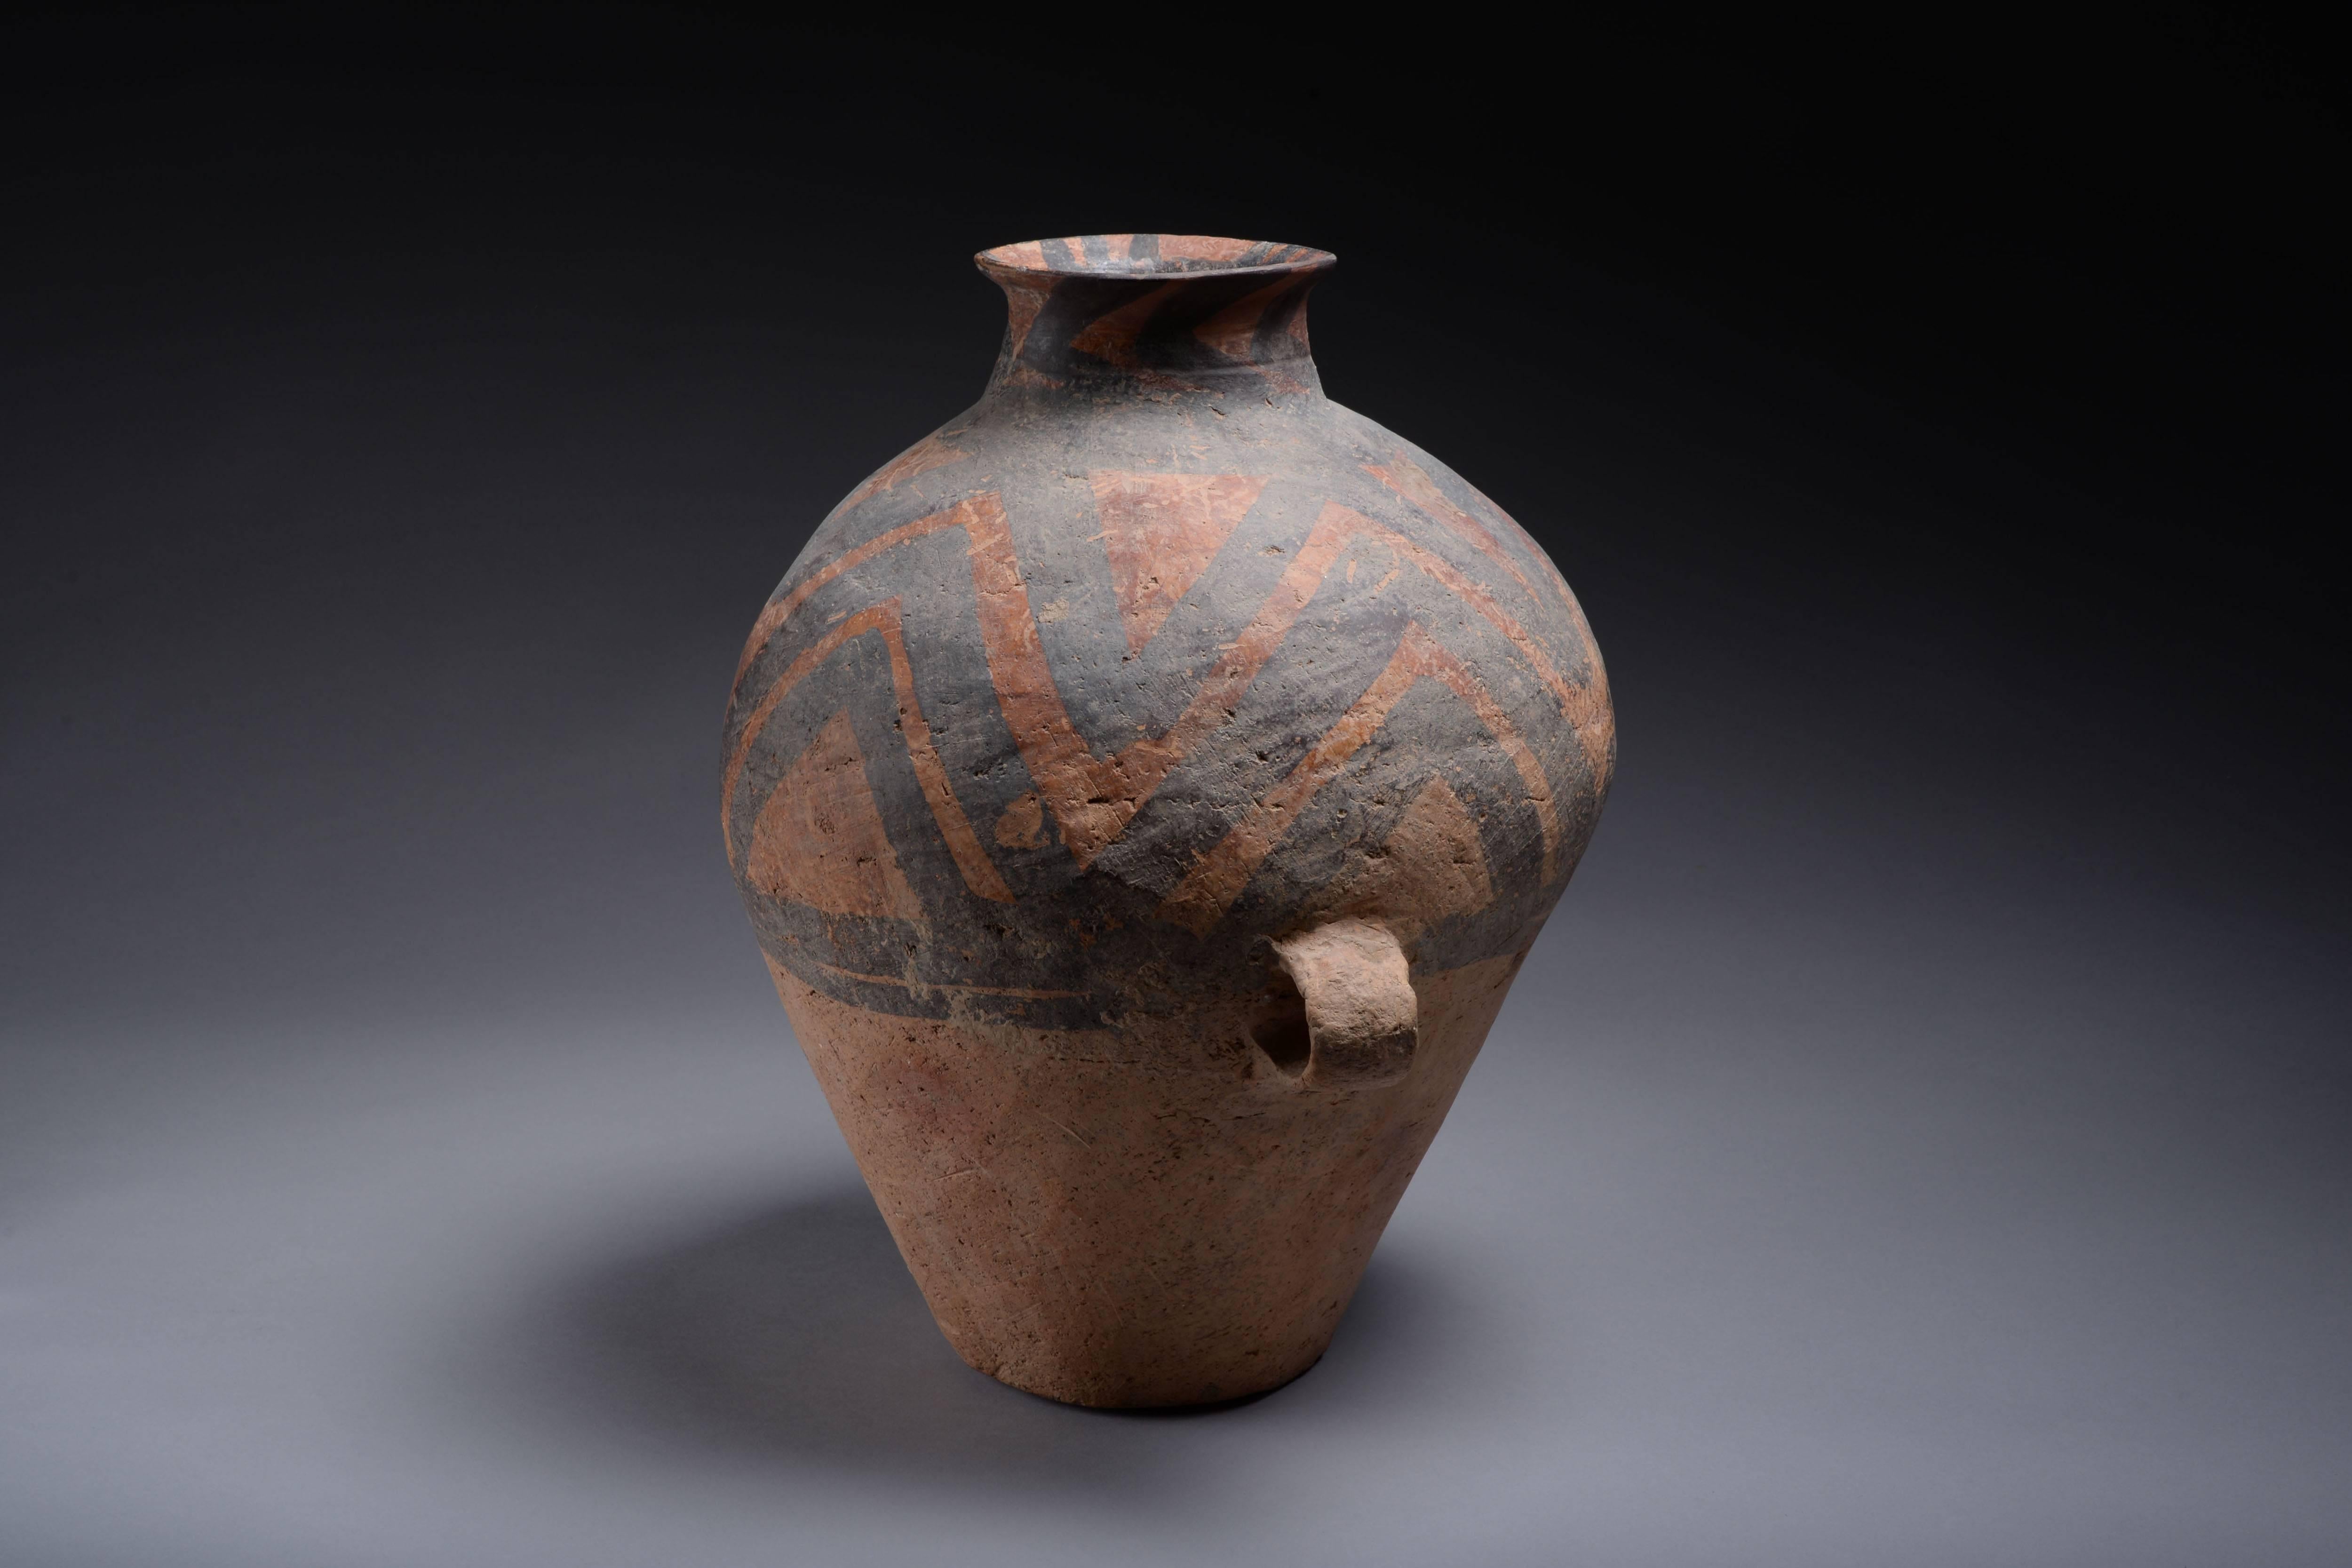 18th Century and Earlier Ancient Chinese Neolithic Yangshao Culture Pottery Amphora, 3000 BC